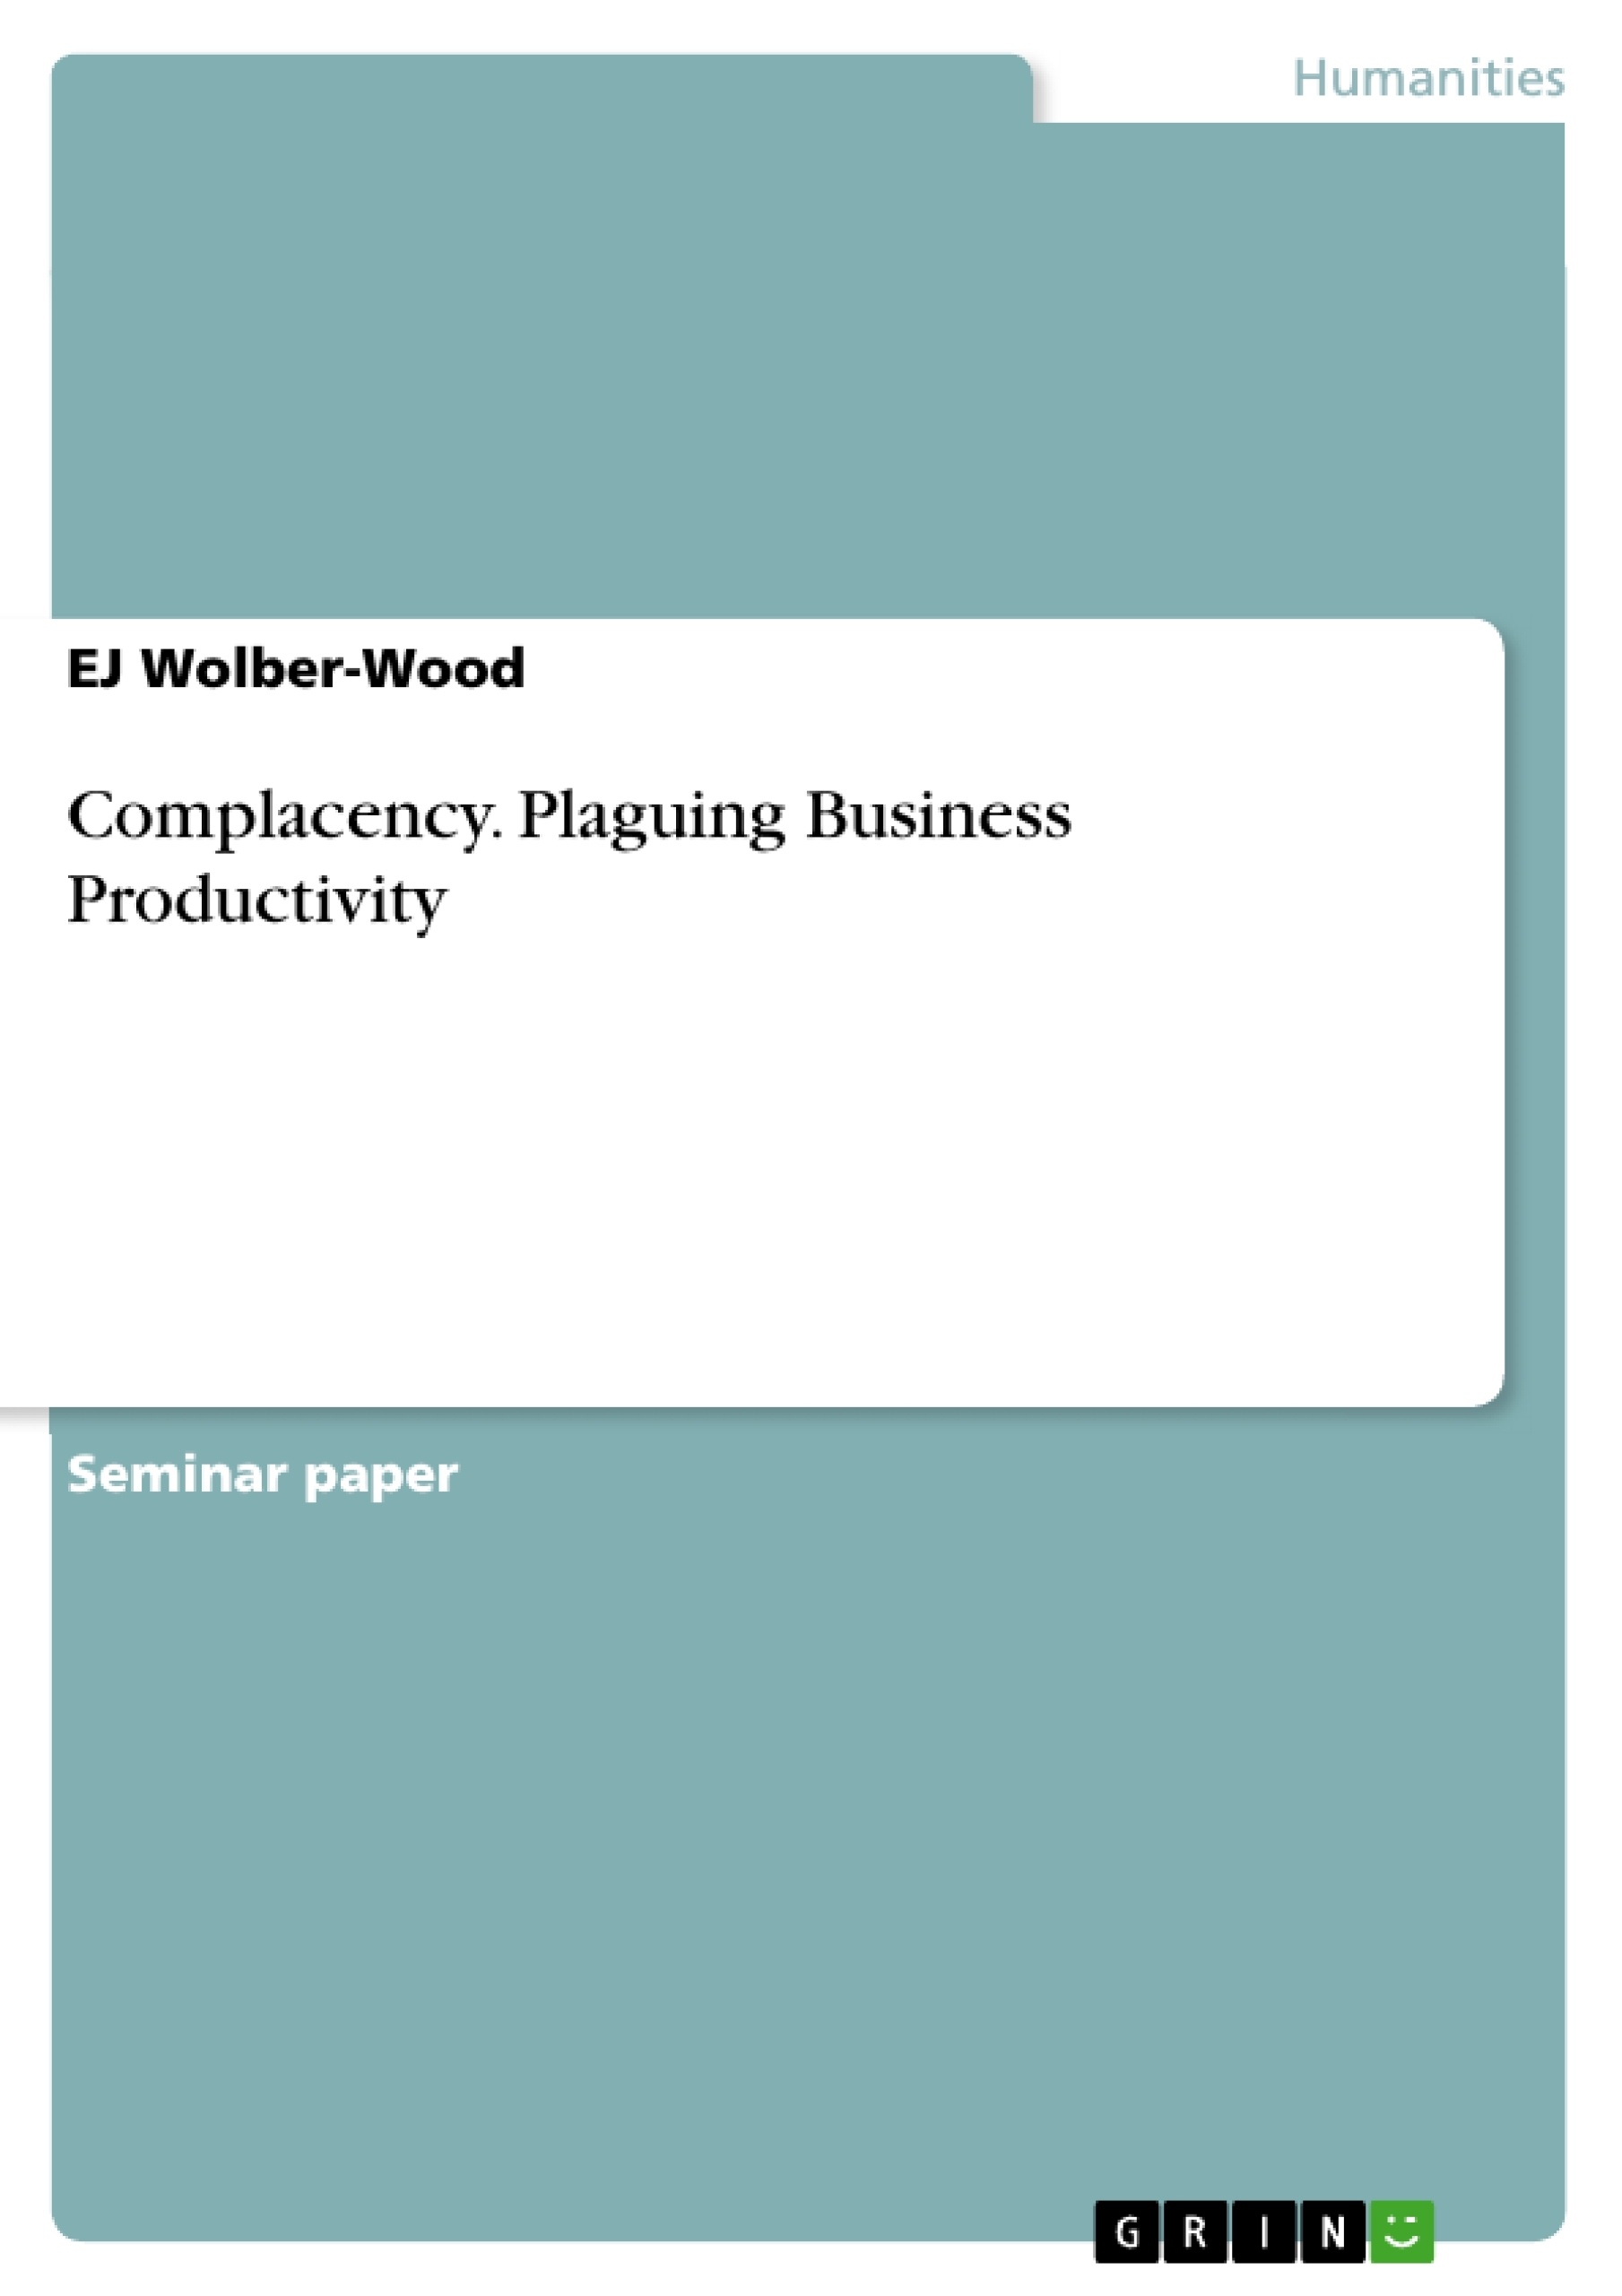 Title: Complacency. Plaguing Business Productivity